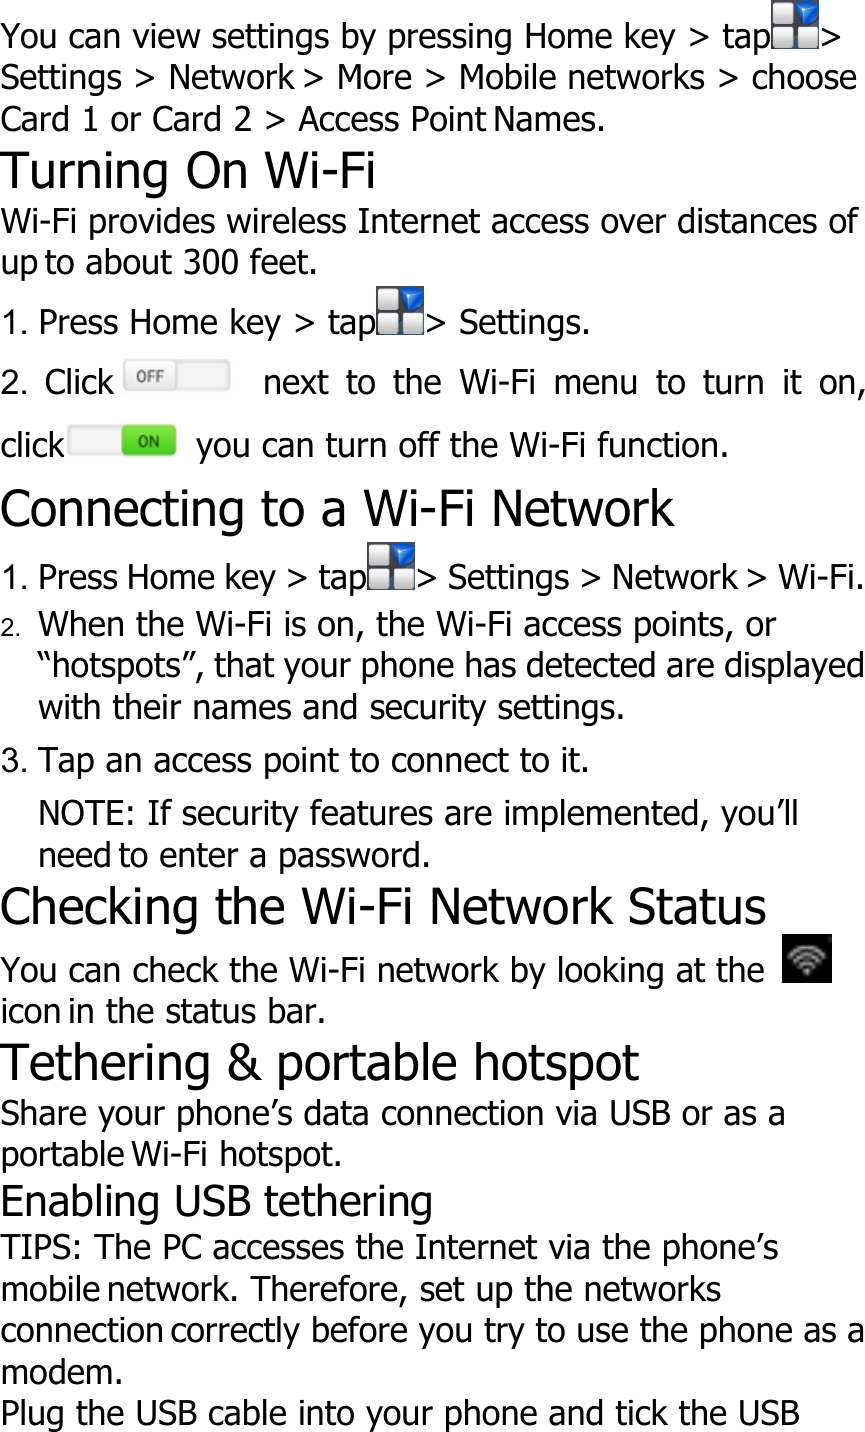 You can view settings by pressing Home key &gt; tap &gt;Settings &gt; Network &gt; More &gt; Mobile networks &gt; chooseCard 1 or Card 2 &gt; Access Point Names.Turning On Wi-FiWi-Fi provides wireless Internet access over distances ofup to about 300 feet.1. Press Home key &gt; tap &gt; Settings.2. Click next to the Wi-Fi menu to turn it on,click you can turn off the Wi-Fi function.Connecting to a Wi-Fi Network1. Press Home key &gt; tap &gt; Settings &gt; Network &gt; Wi-Fi.2. When the Wi-Fi is on, the Wi-Fi access points, or“hotspots”, that your phone has detected are displayedwith their names and security settings.3. Tap an access point to connect to it.NOTE: If security features are implemented, you’llneed to enter a password.Checking the Wi-Fi Network StatusYou can check the Wi-Fi network by looking at theicon in the status bar.Tethering &amp; portable hotspotShare your phone’s data connection via USB or as aportable Wi-Fi hotspot.Enabling USB tetheringTIPS: The PC accesses the Internet via the phone’smobile network. Therefore, set up the networksconnection correctly before you try to use the phone as amodem.Plug the USB cable into your phone and tick the USB